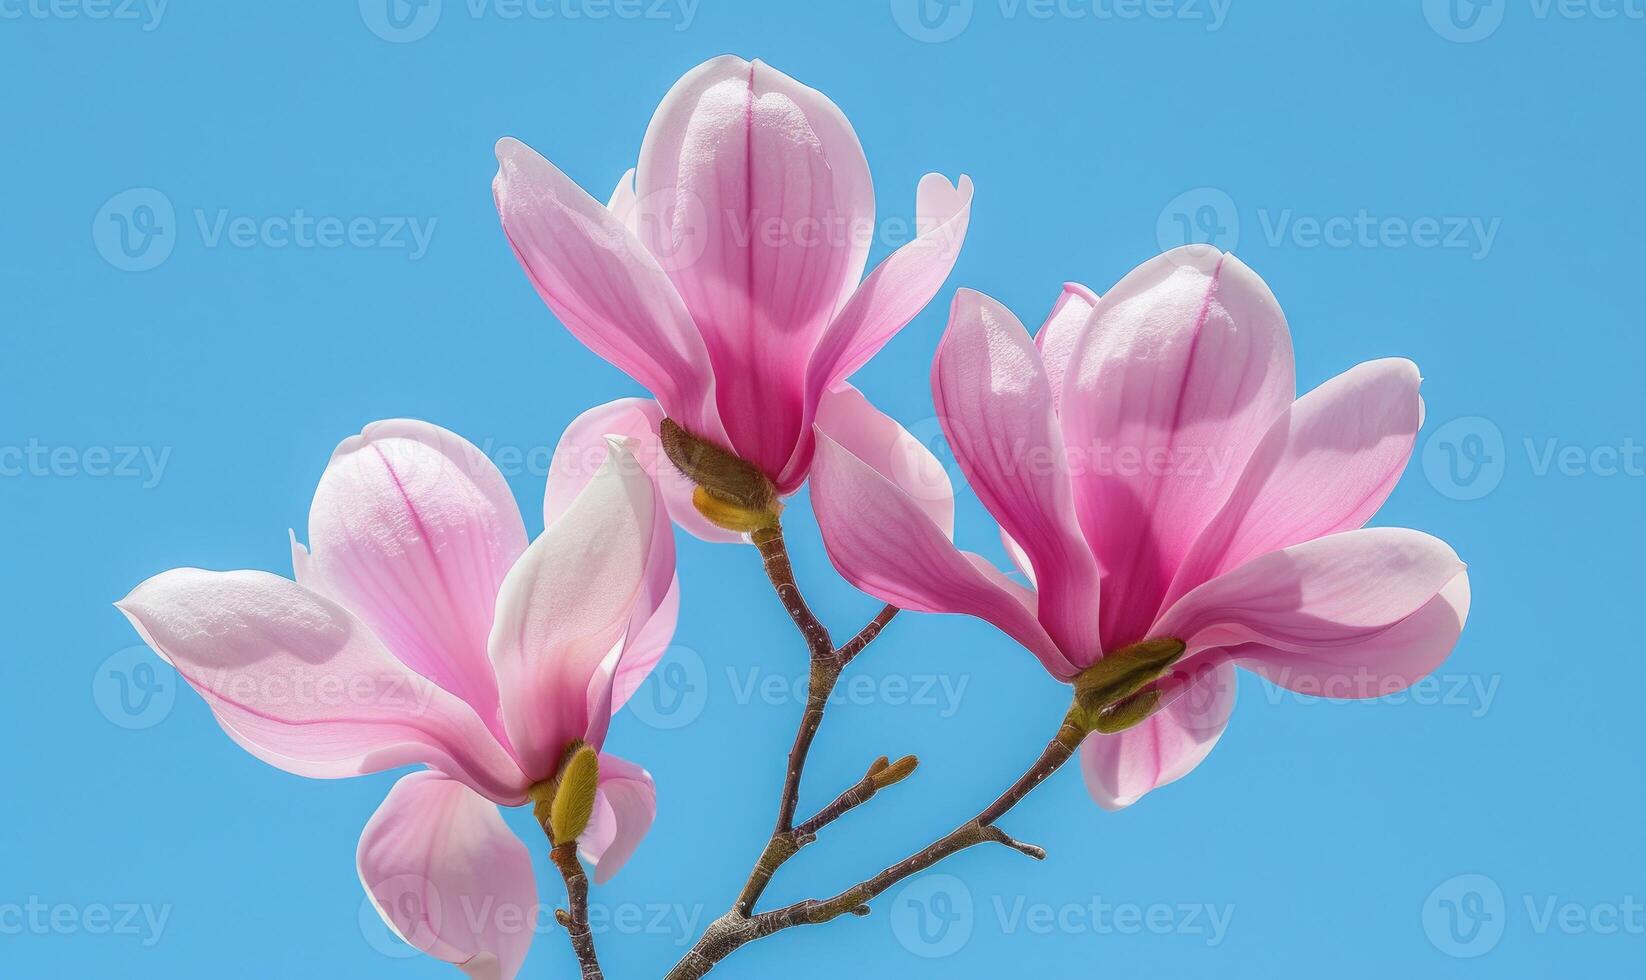 A cluster of pink magnolia blossoms against a clear blue sky photo